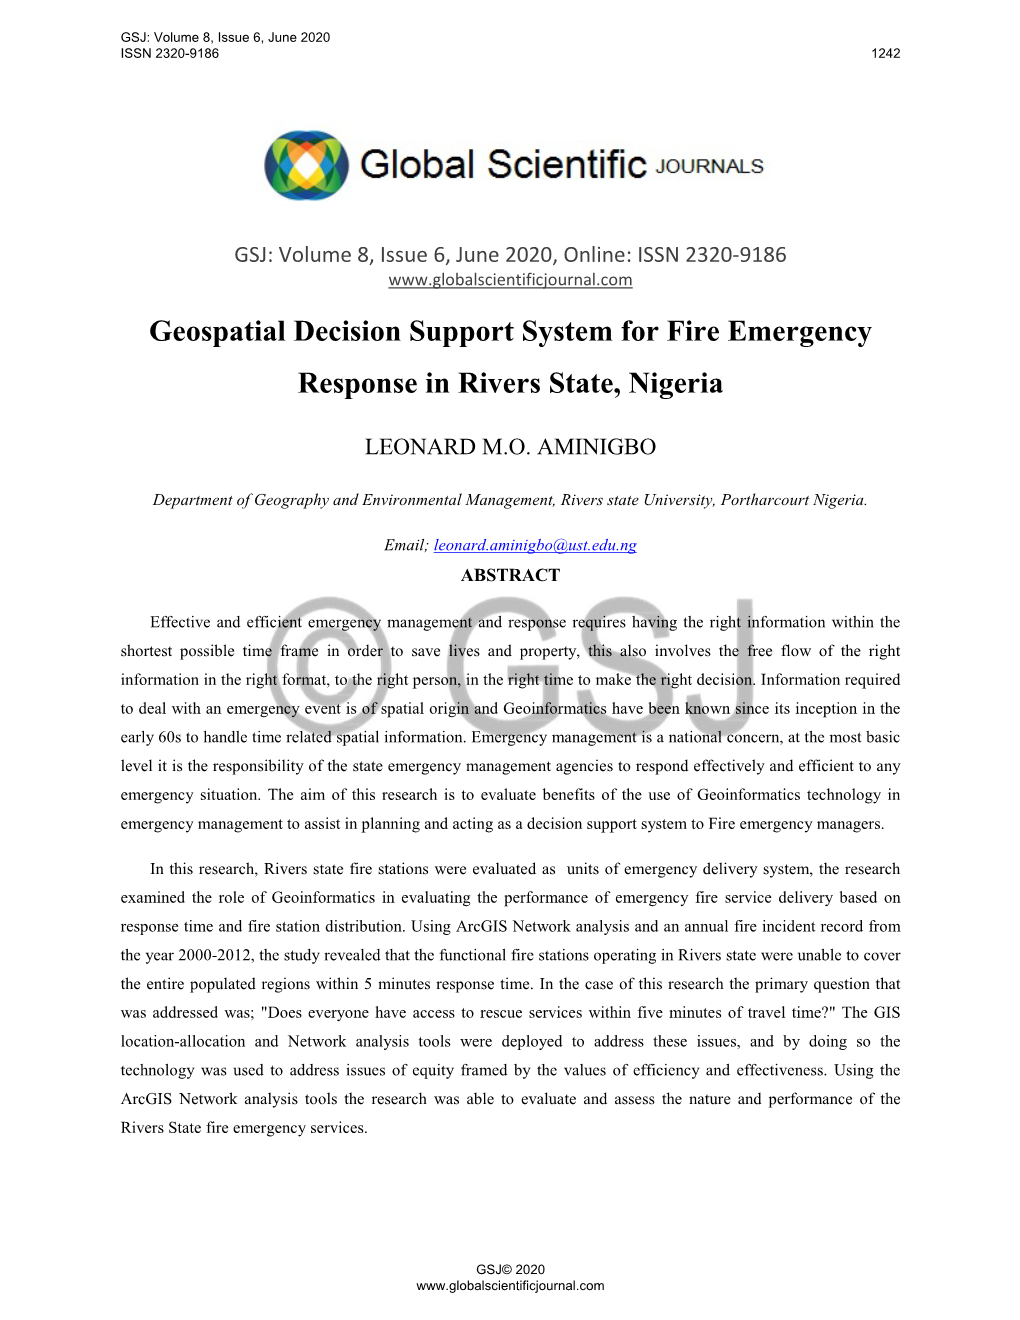 Geospatial Decision Support System for Fire Emergency Response in Rivers State, Nigeria